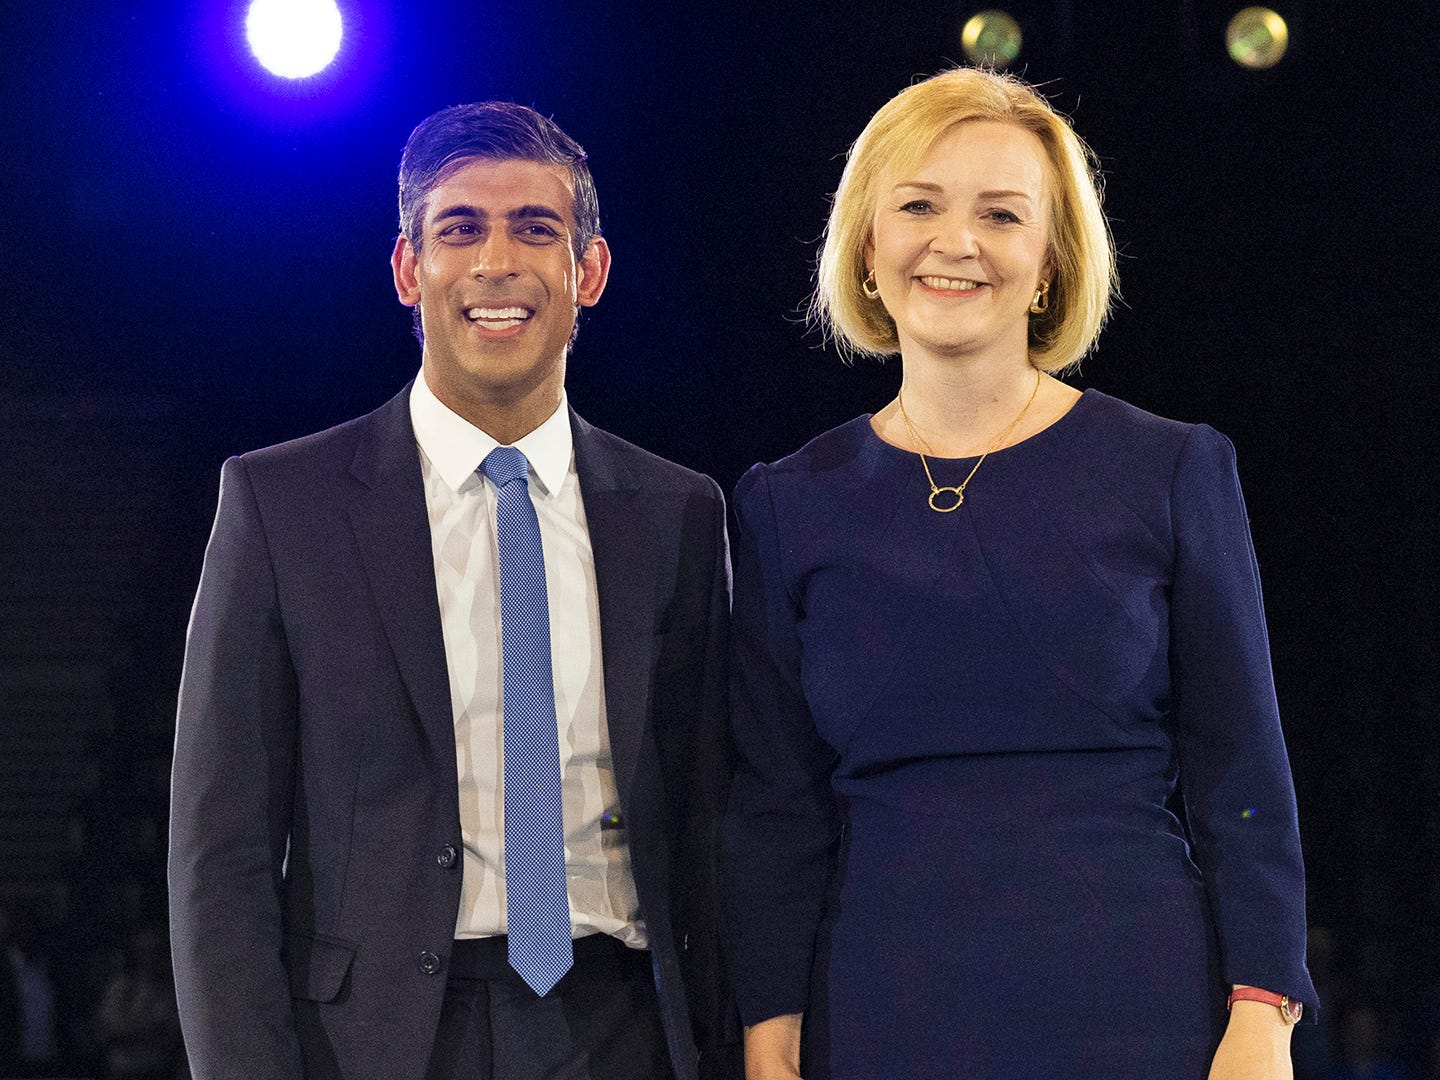 Liz Truss to Become UK Prime Minister After Winning Conservative Party  Leadership